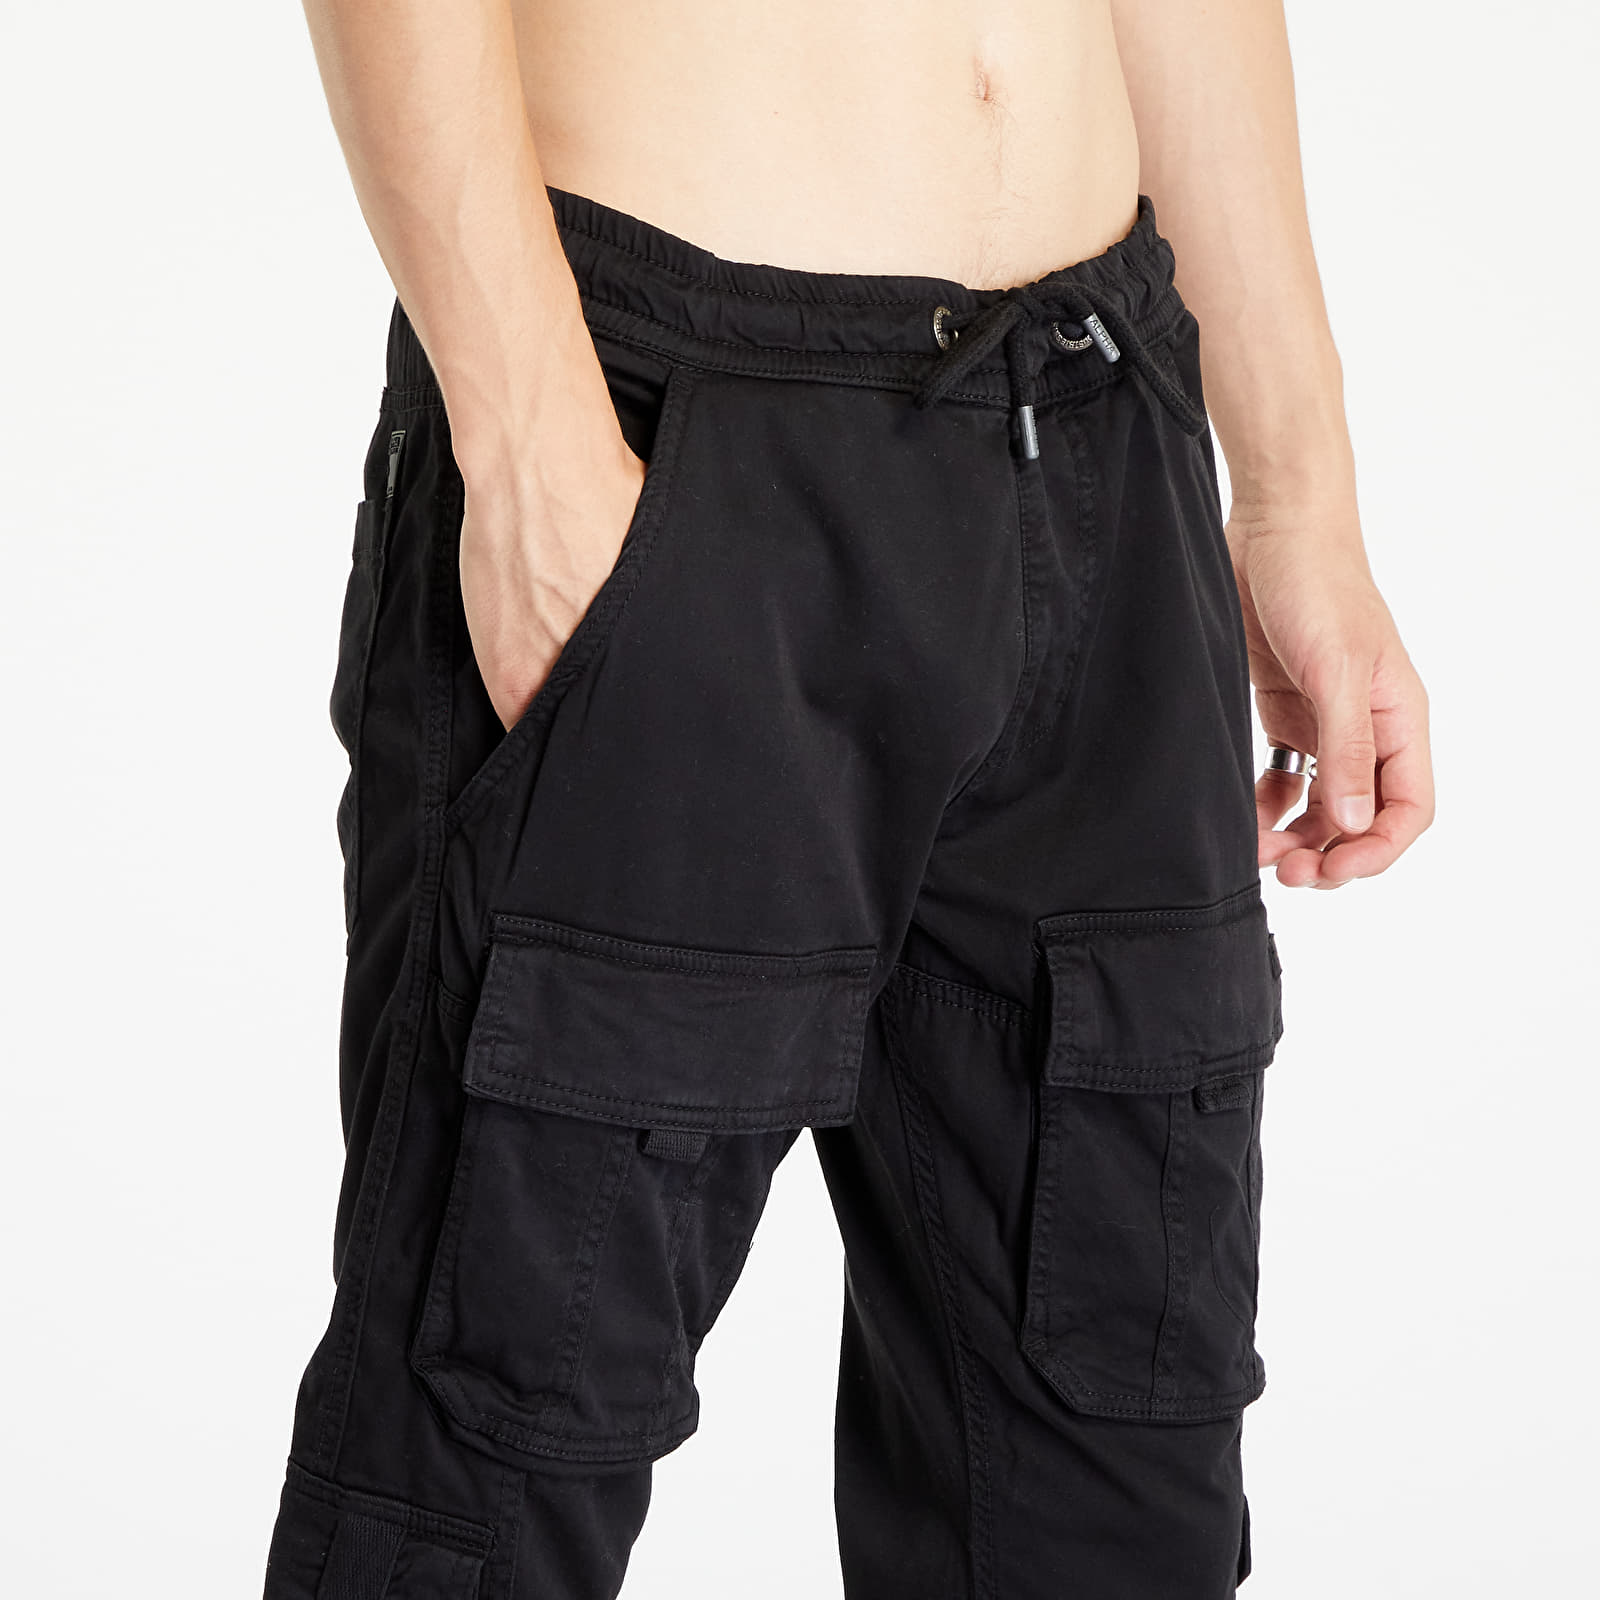 Jogger Queens Black Industries Pants and Sergeant Pant Alpha | jeans